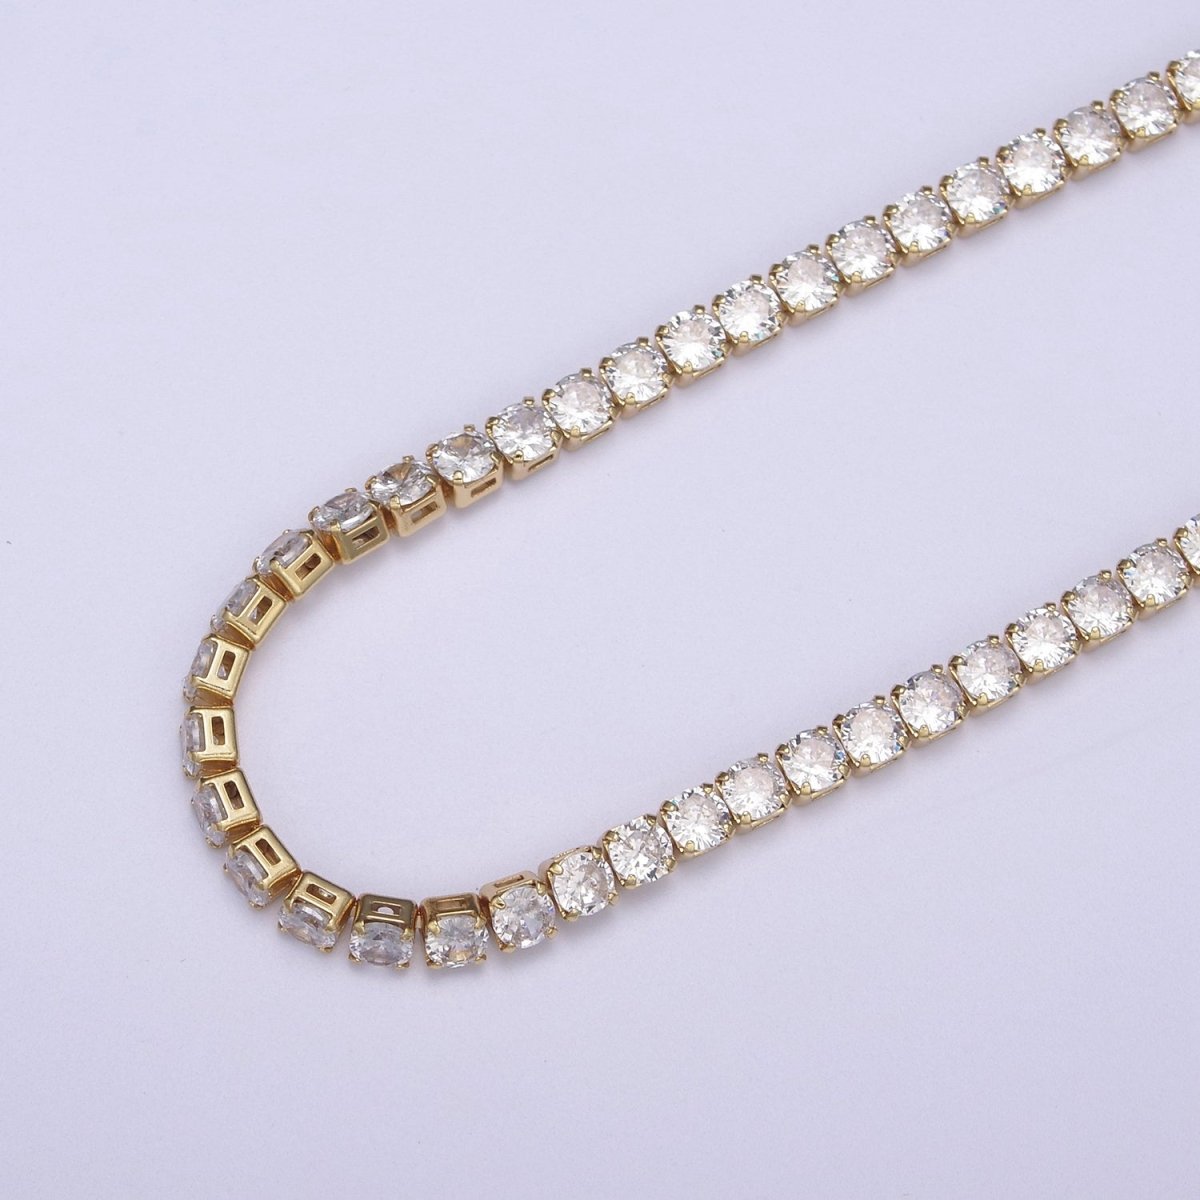 24K Gold Filled Tennis Chain, 4mm Unfinished Crystal Cubic Zirconia CZ Chain For Jewelry Making in Gold & Silver, Wholesale Supply For Diamond Necklace Bracelet Anklet | ROLL-684, ROLL-685 Clearance Pricing - DLUXCA